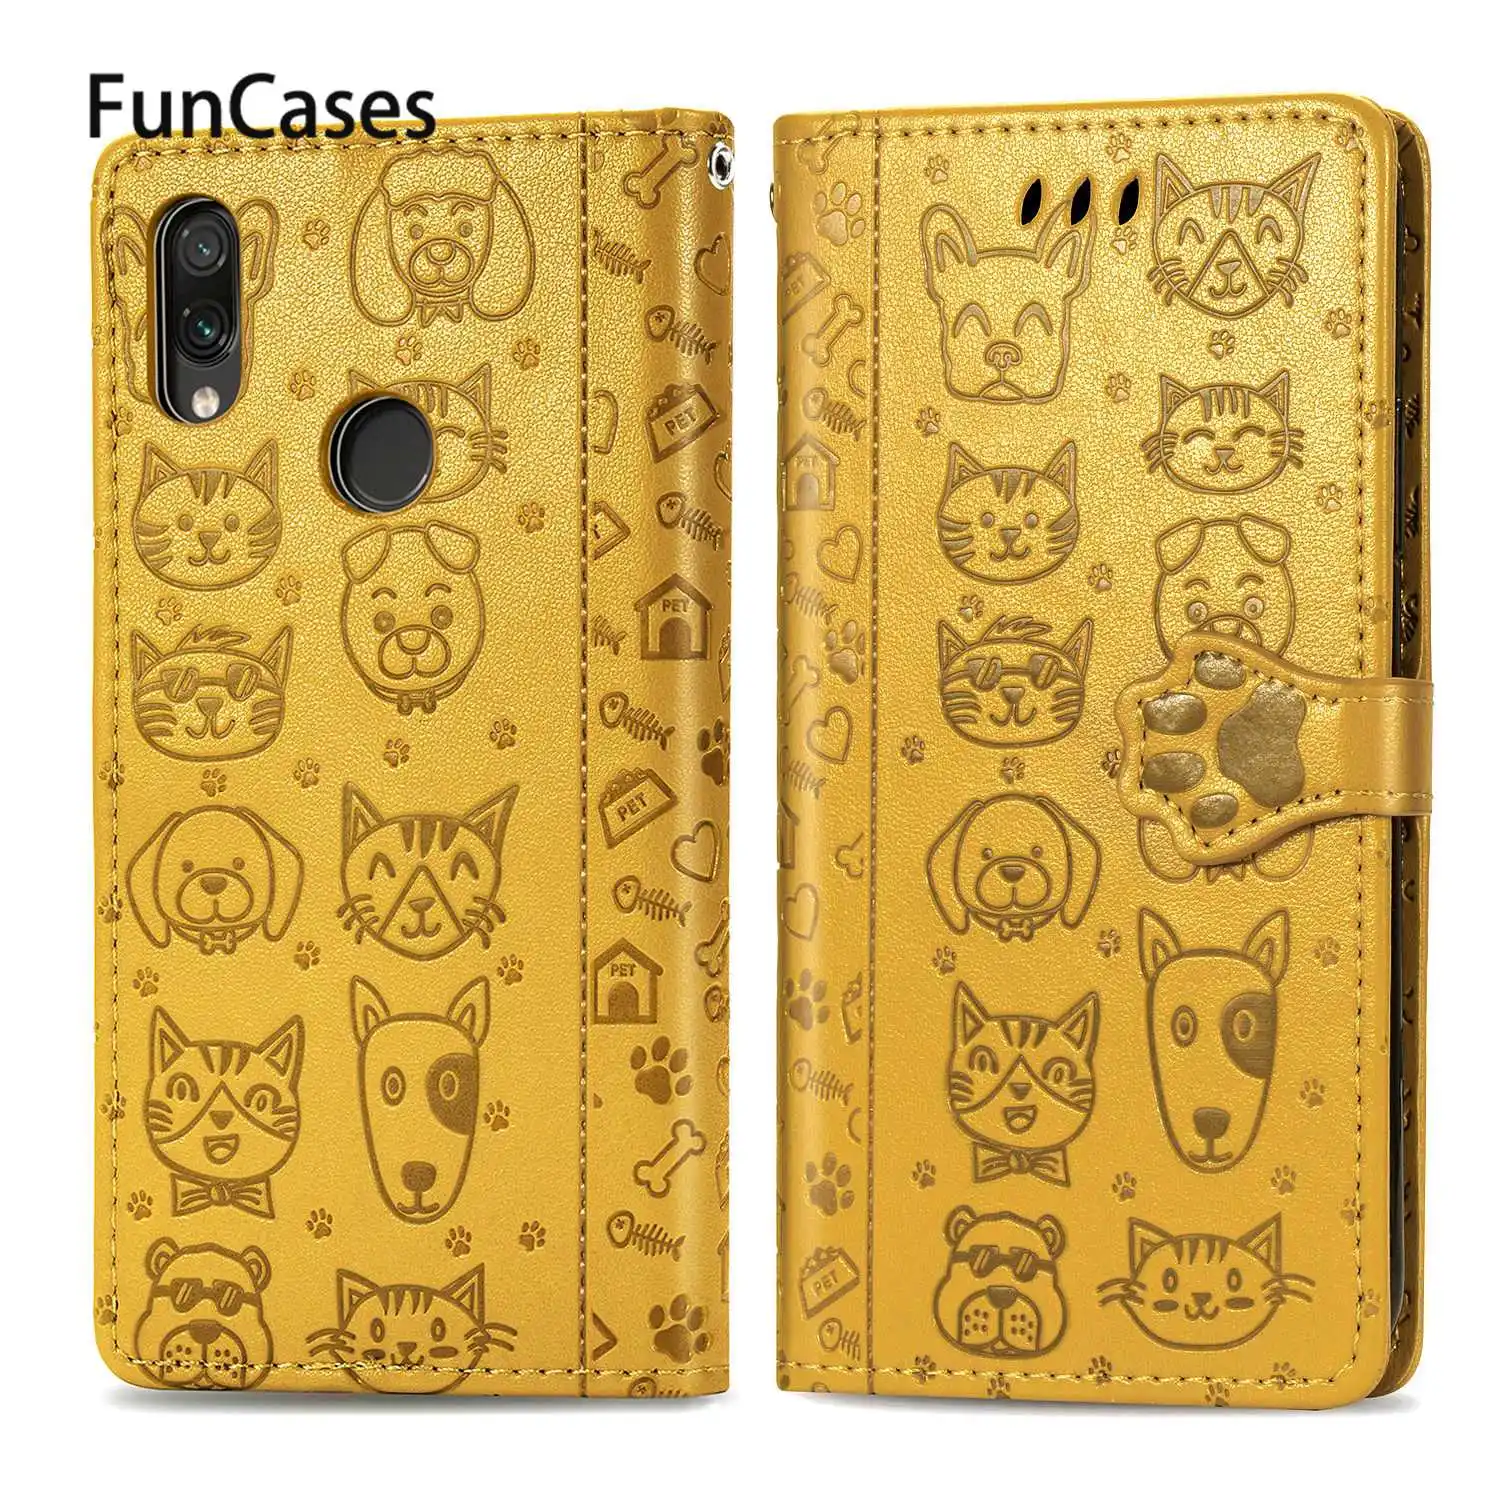 Lovely Dog Cases Covers For telefoon Redmi Note 9 Pro Protective PU Leather Phone Bag Fundas Redmi coque Note 7S 7 8 Pro Max 8T images - 2